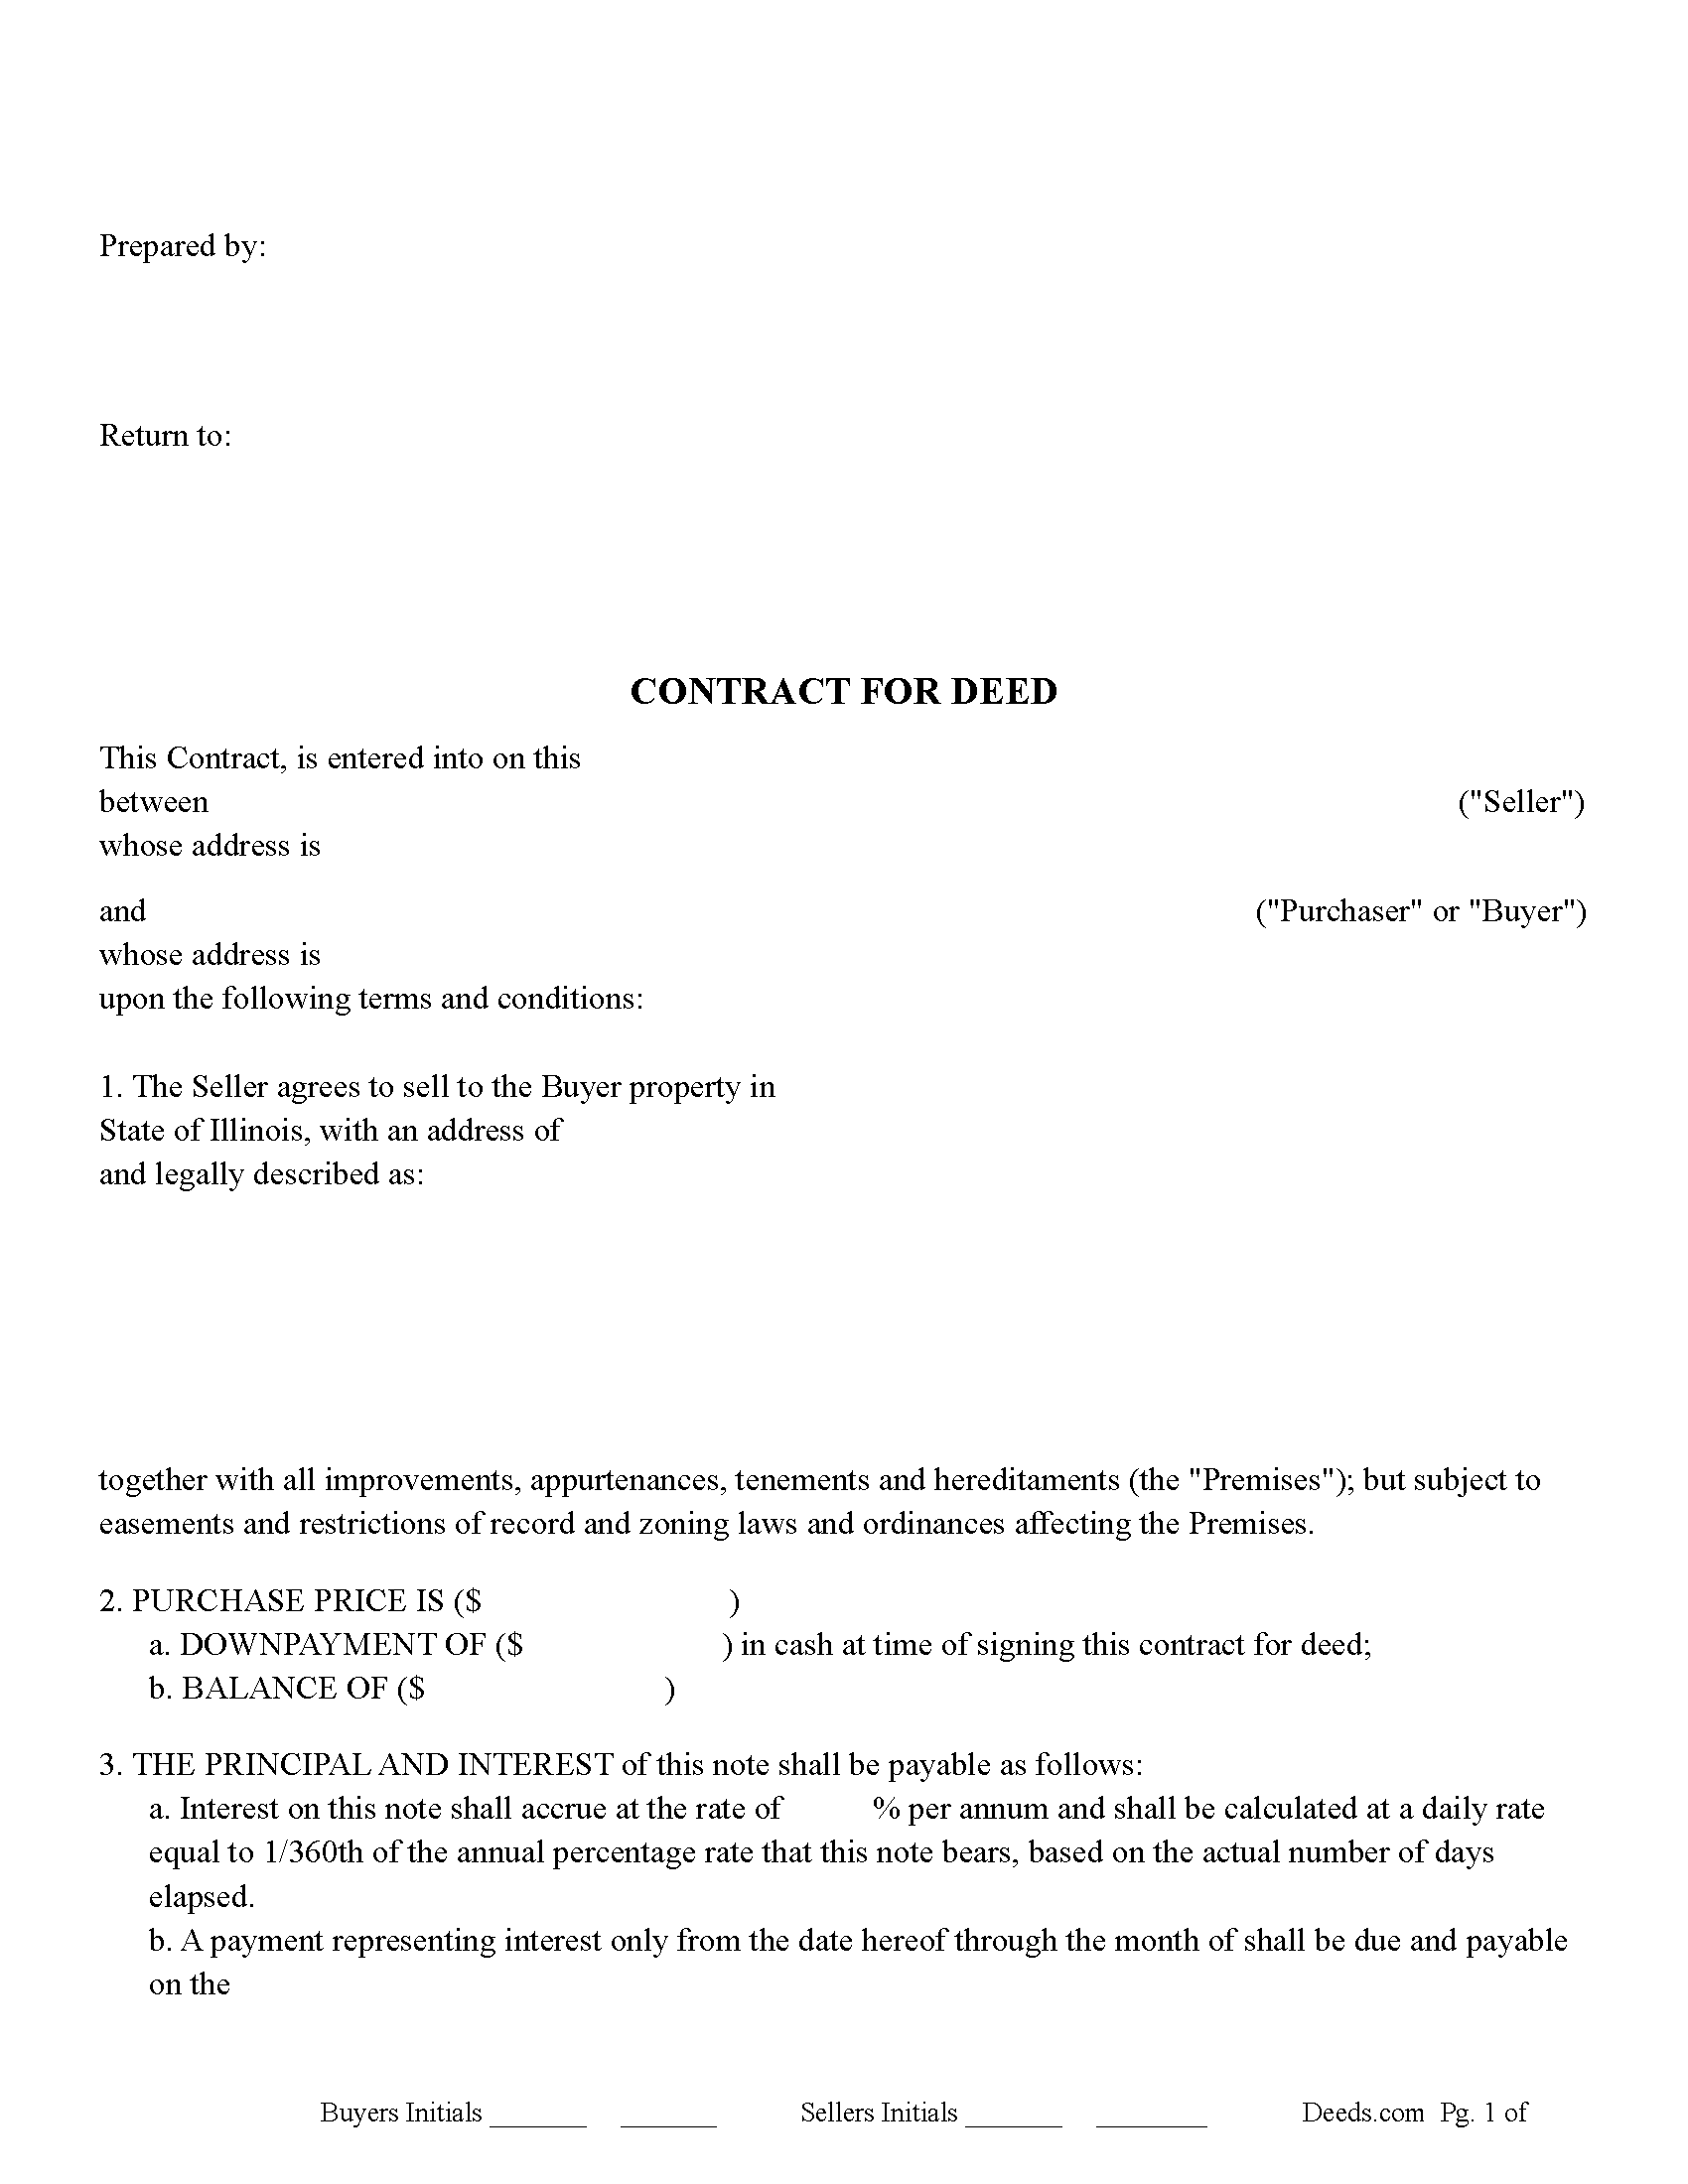 Iroquois County Contract for Deed Form